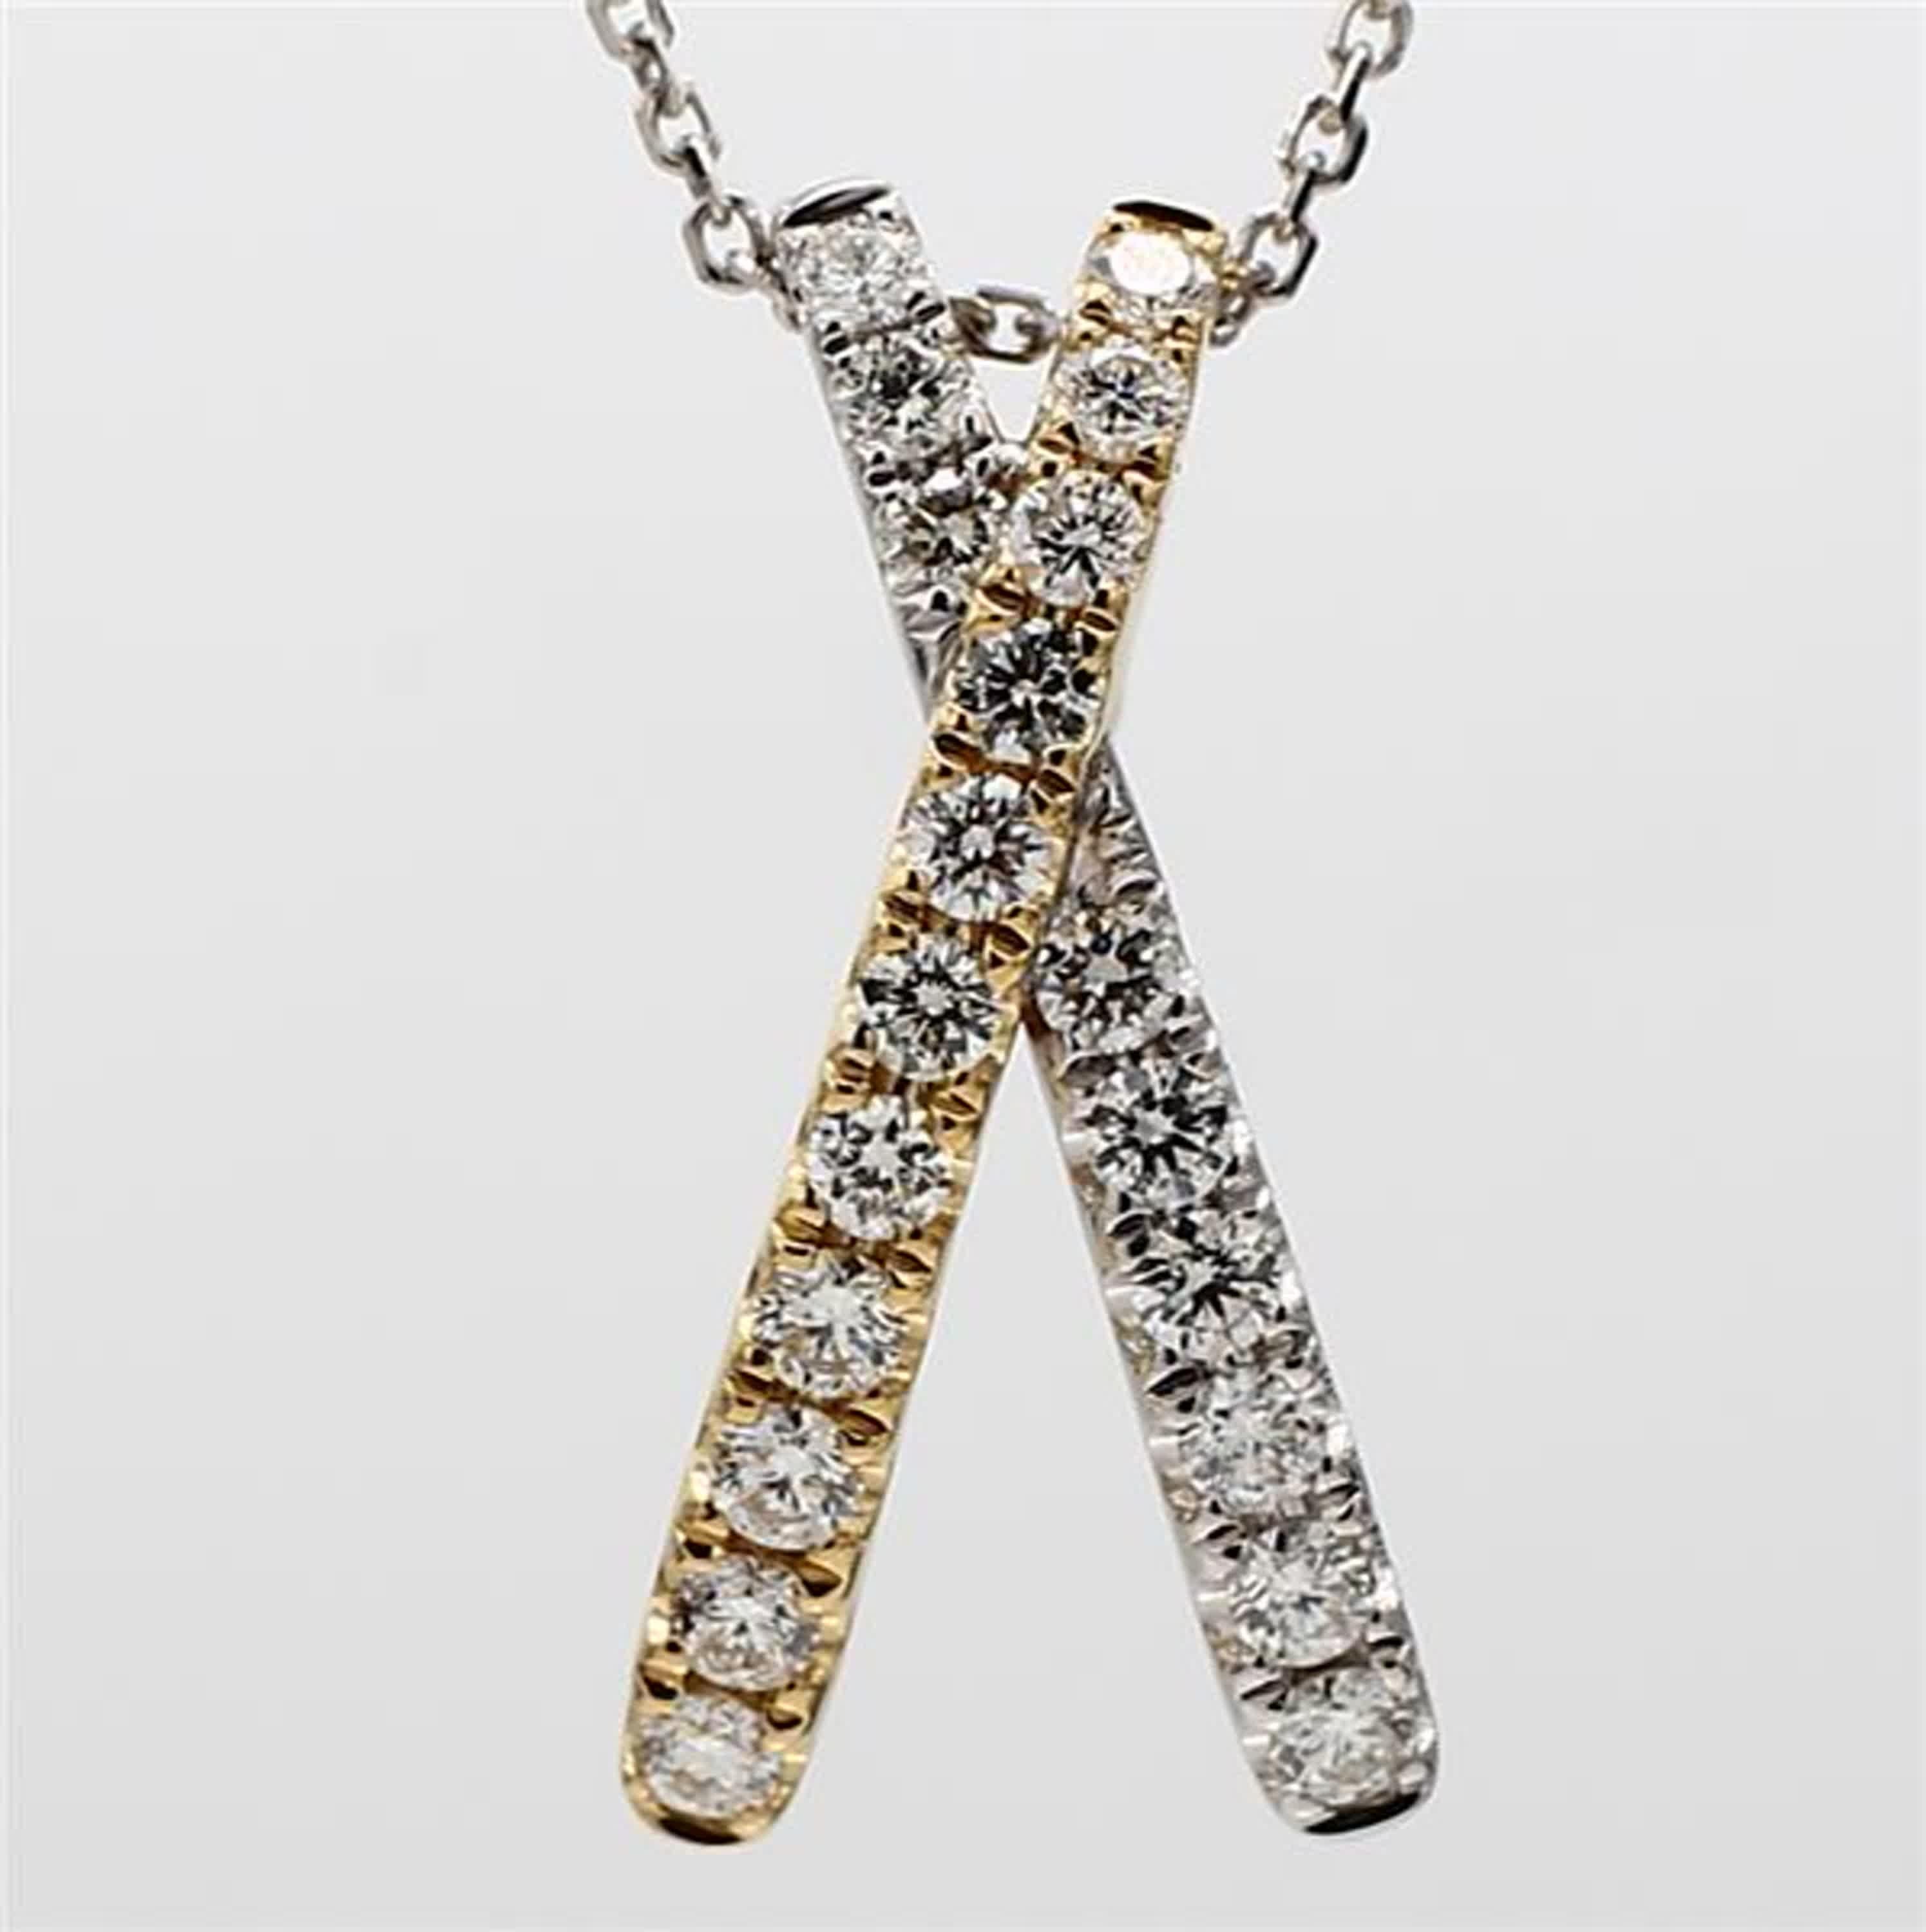 RareGemWorld's classic diamond pendant. Mounted in a beautiful 18K Yellow and White Gold setting with natural round white diamond melee. This pendant is guaranteed to impress and enhance your personal collection.

Total Weight: .55cts

Length x